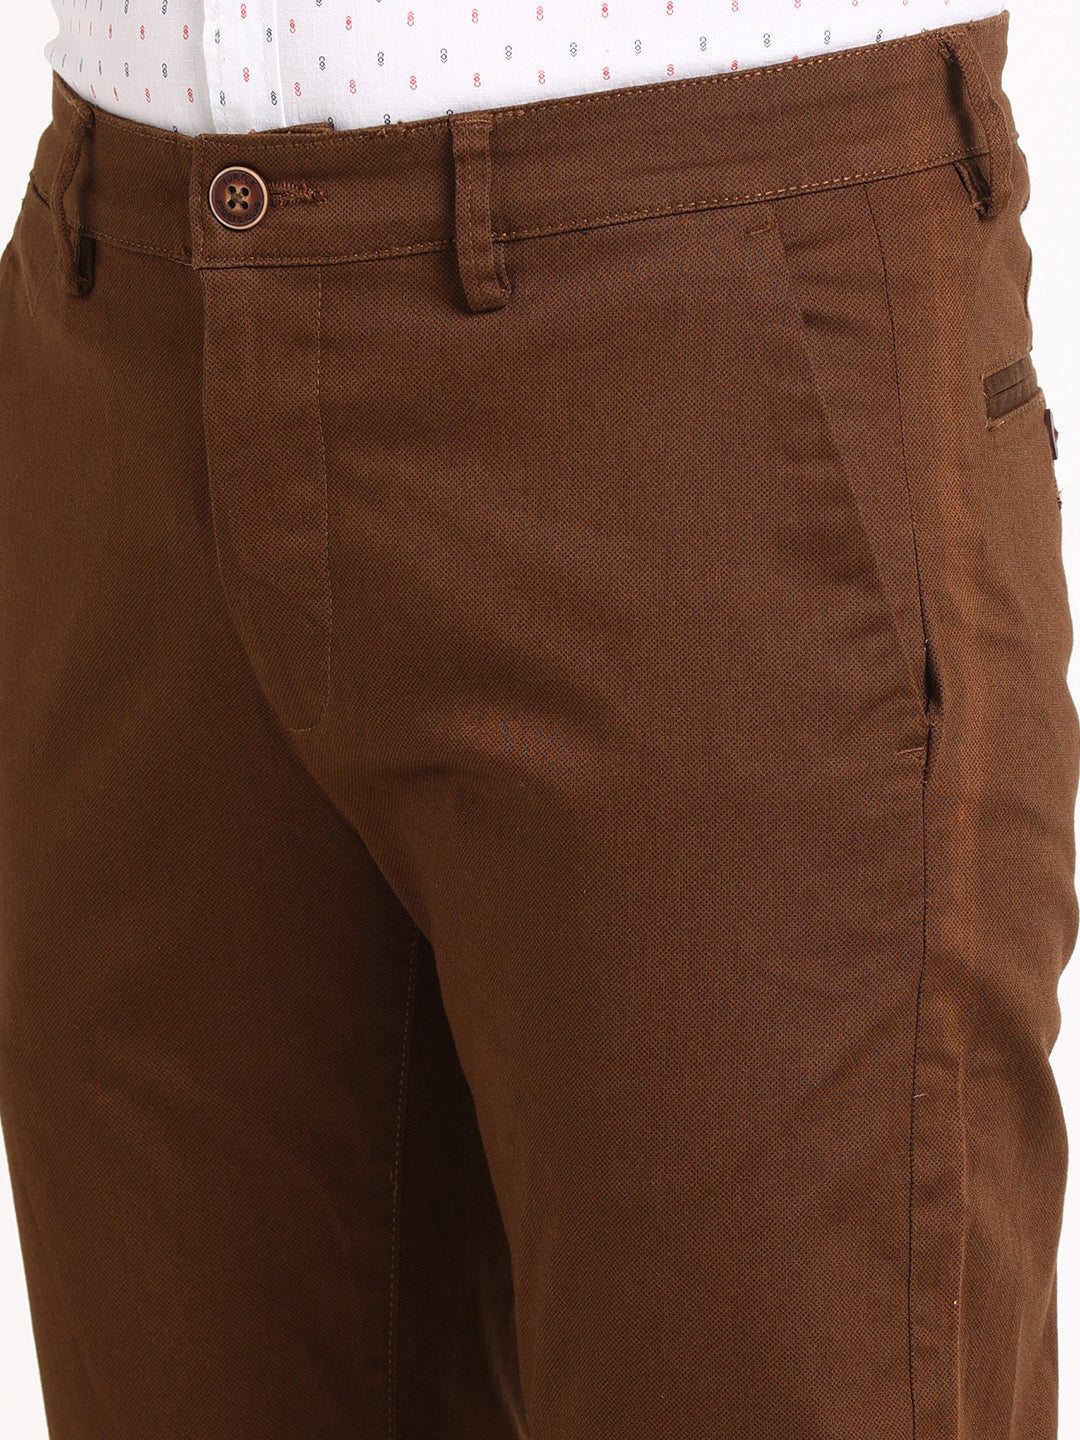 Cotton Stretch Brown Printed Narrow Fit Flat Front Casual Trouser